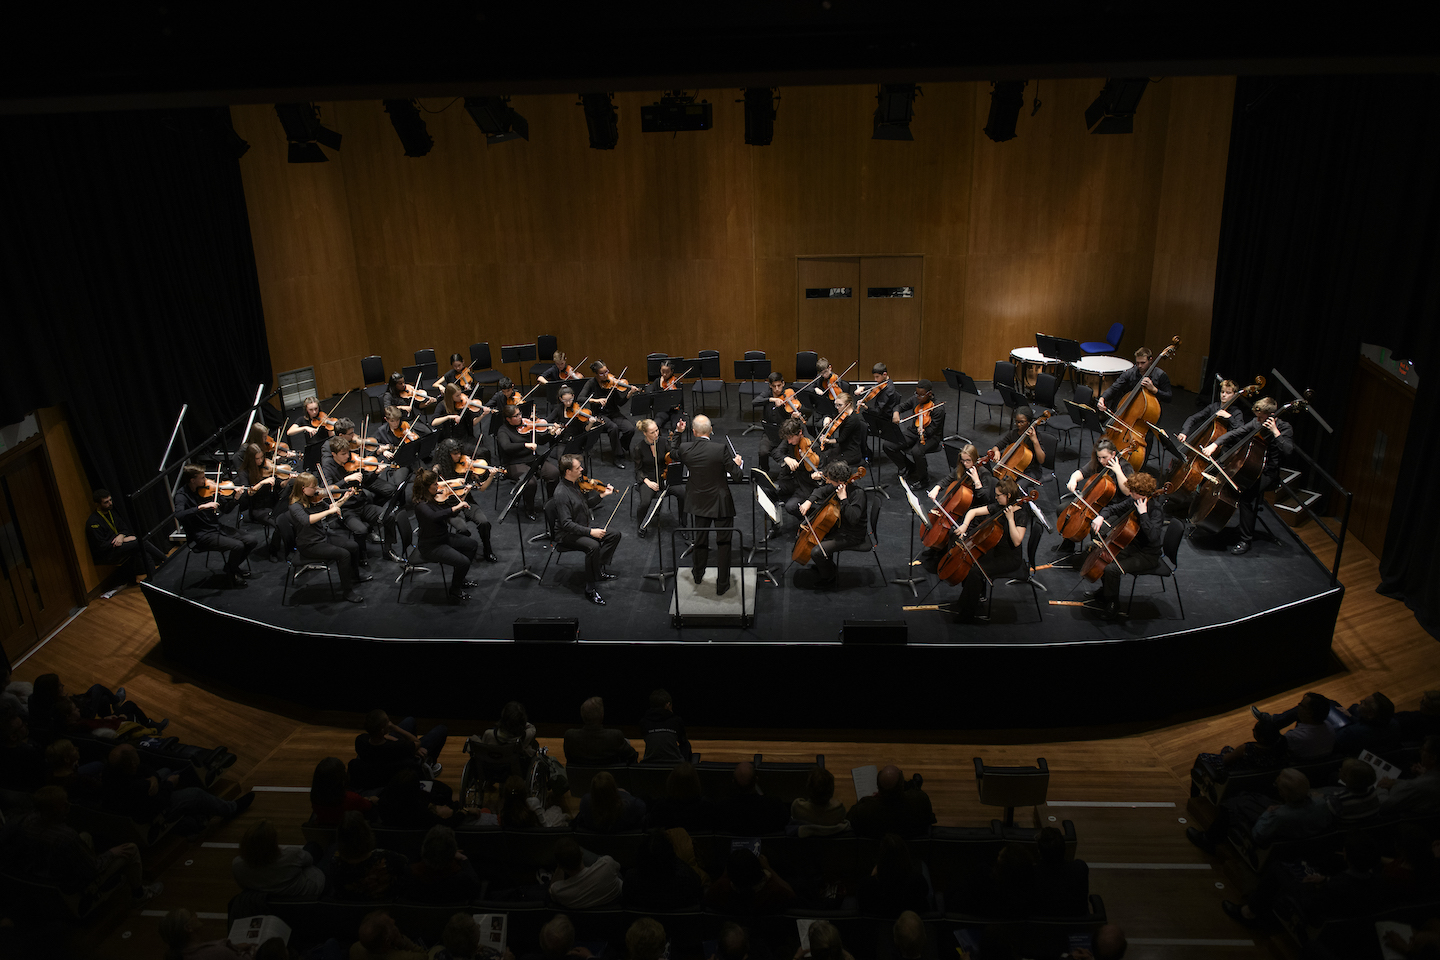 The English Schools' Orchestra with the Navarra Quartet